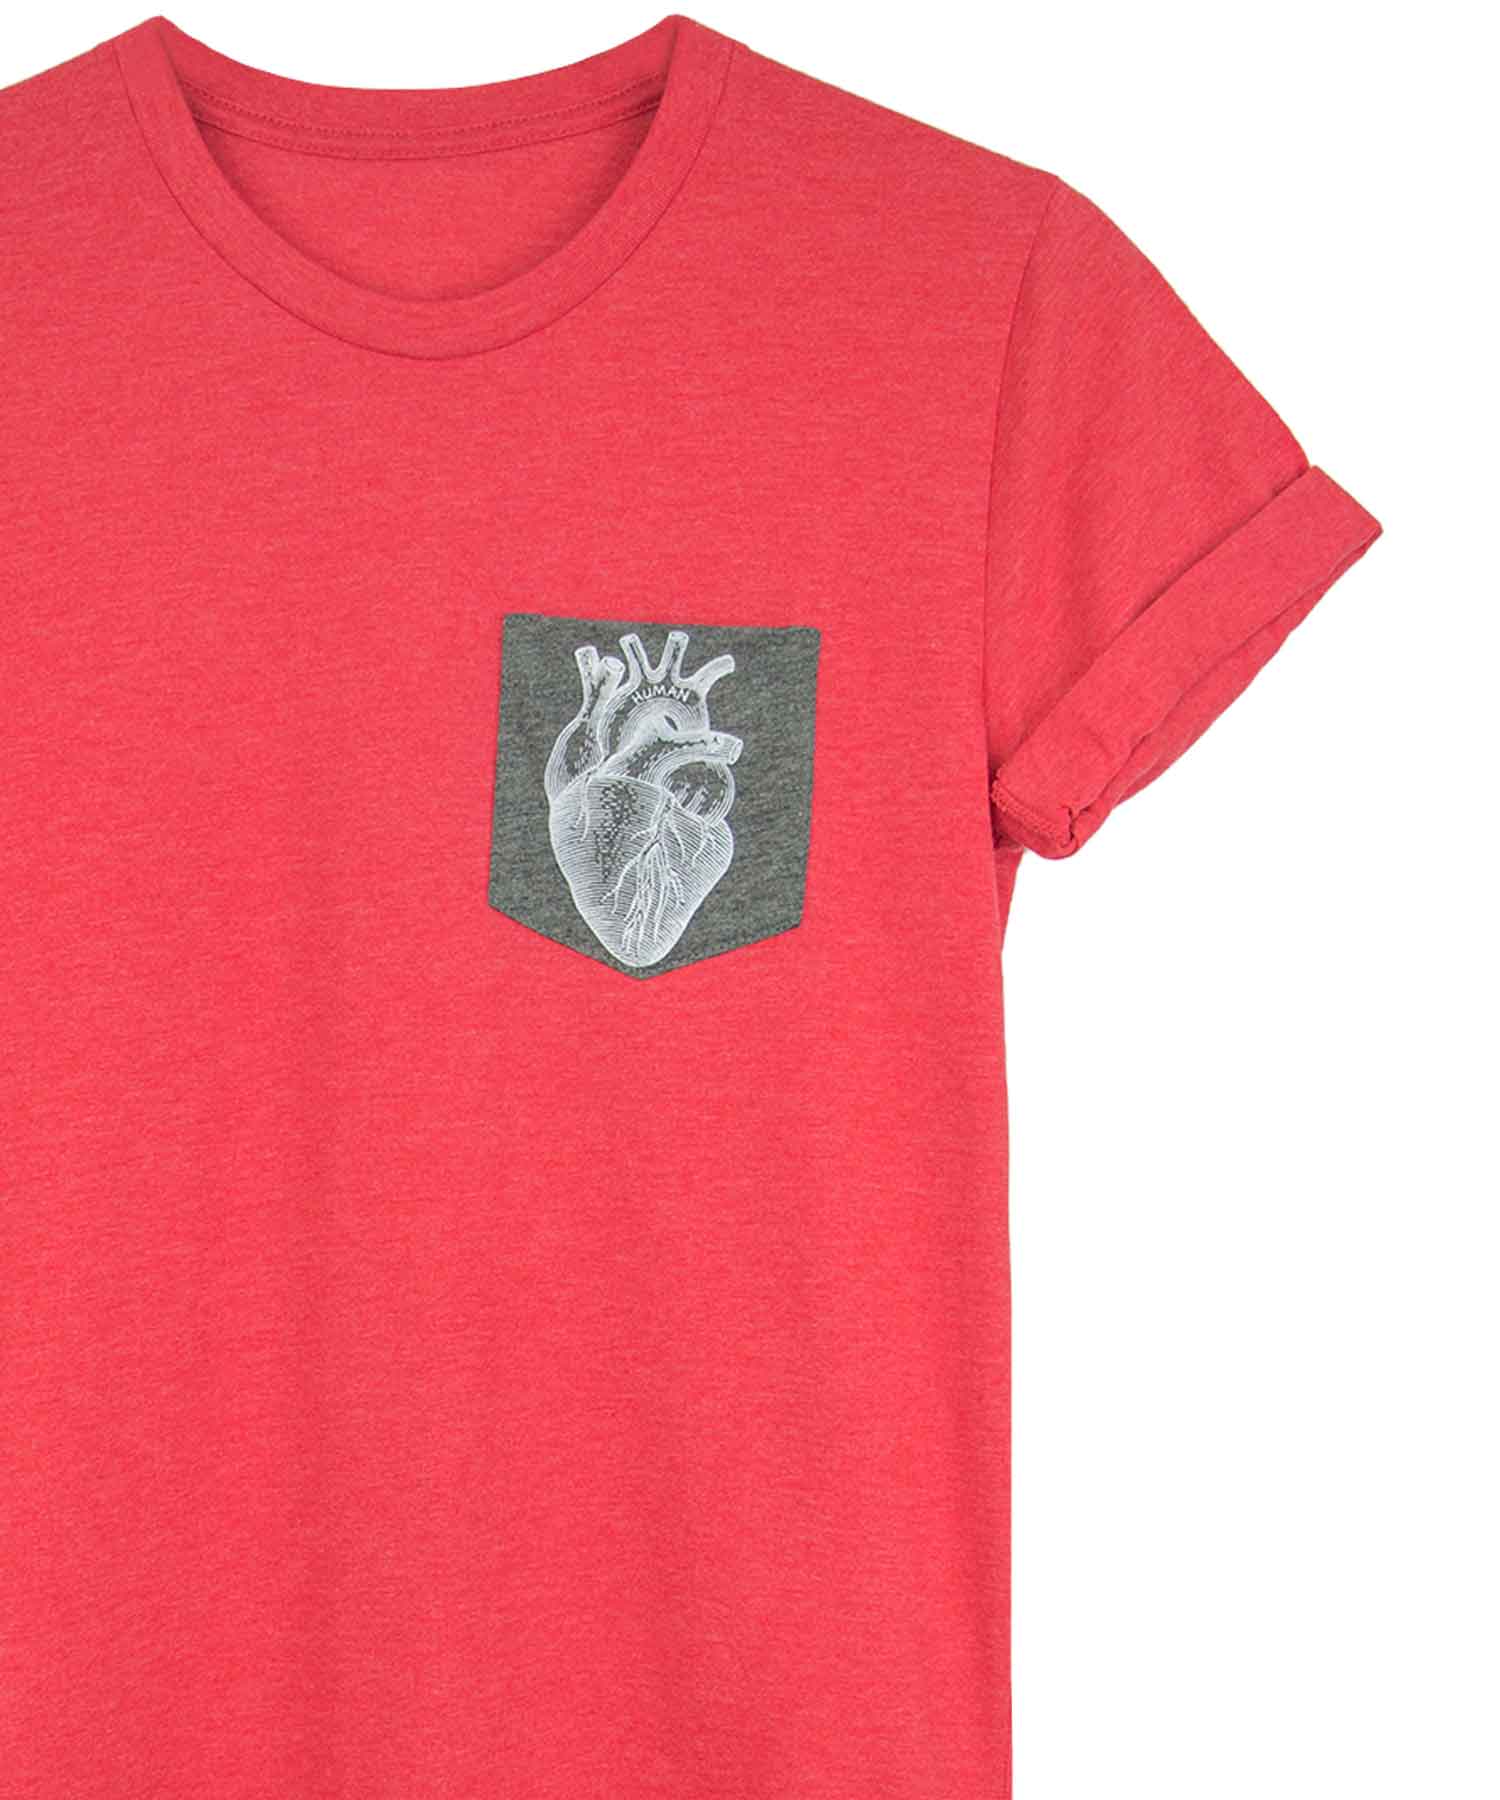 Androgynous Fox red pocket tee with grey pocket featuring an anatomical heart print. 